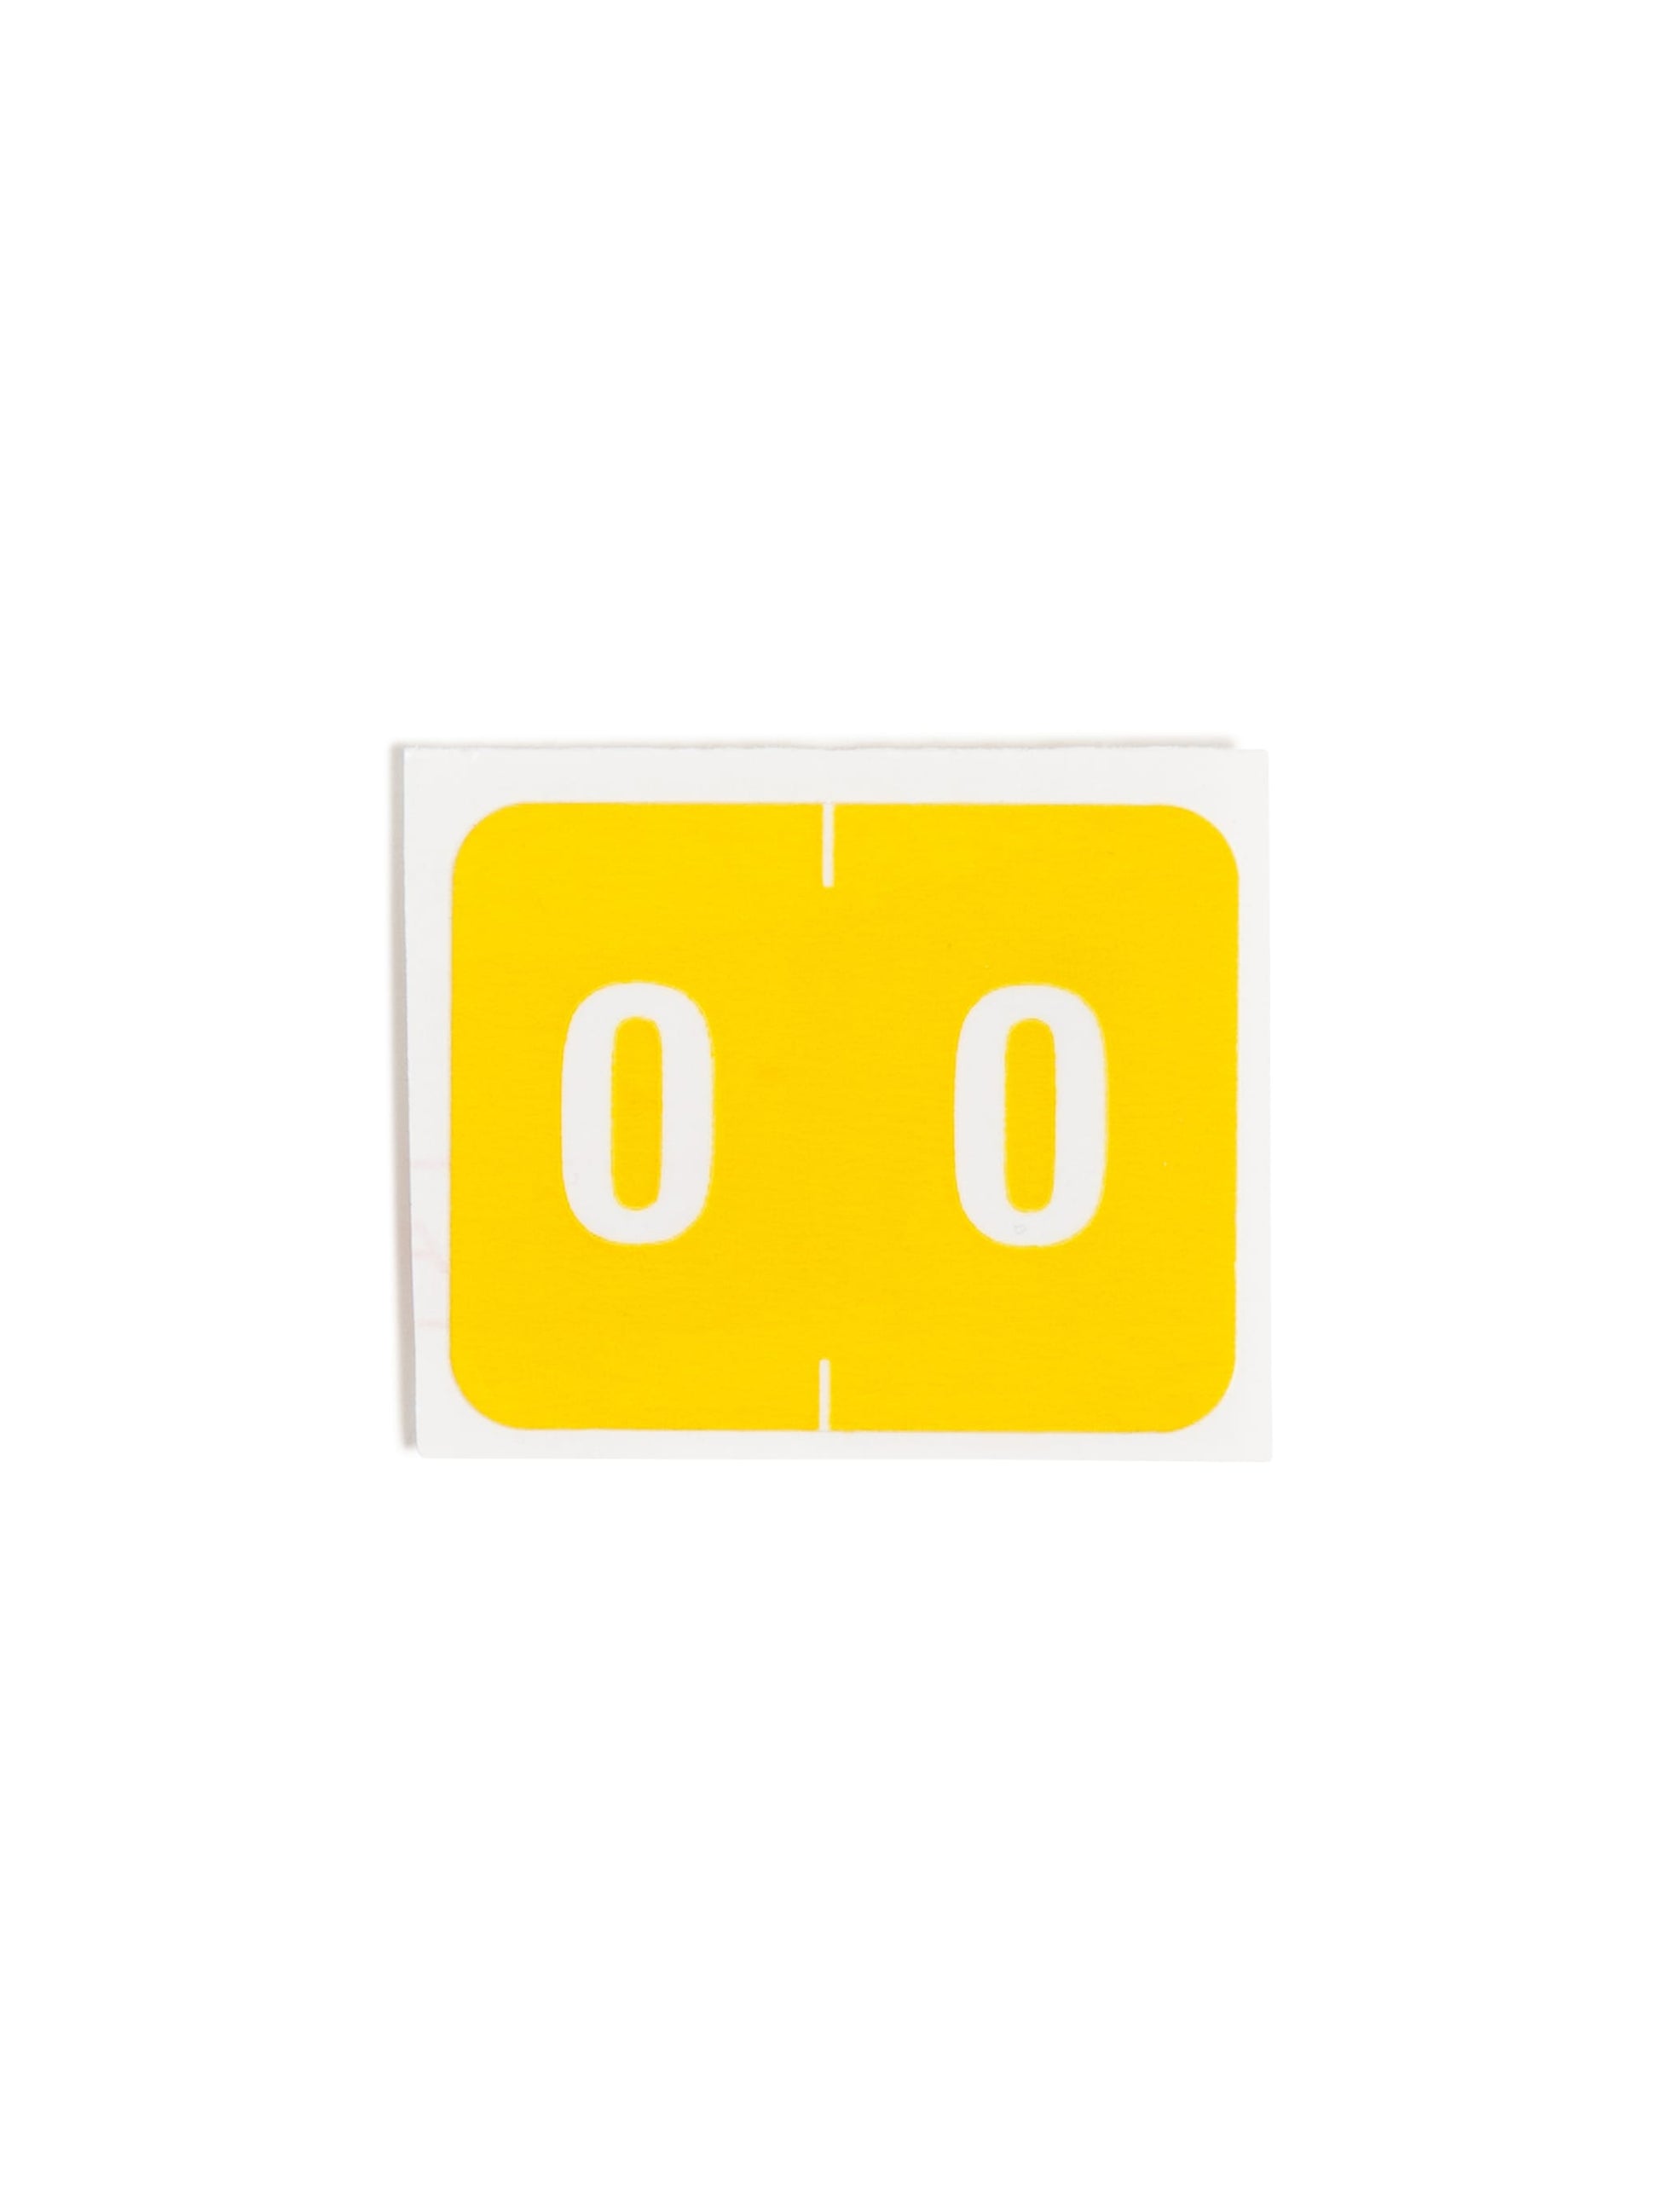 DCCRN Color-Coded Numeric Labels - Rolls, Yellow Color, 1-1/4" X 1" Size, Set of 1, 086486673402